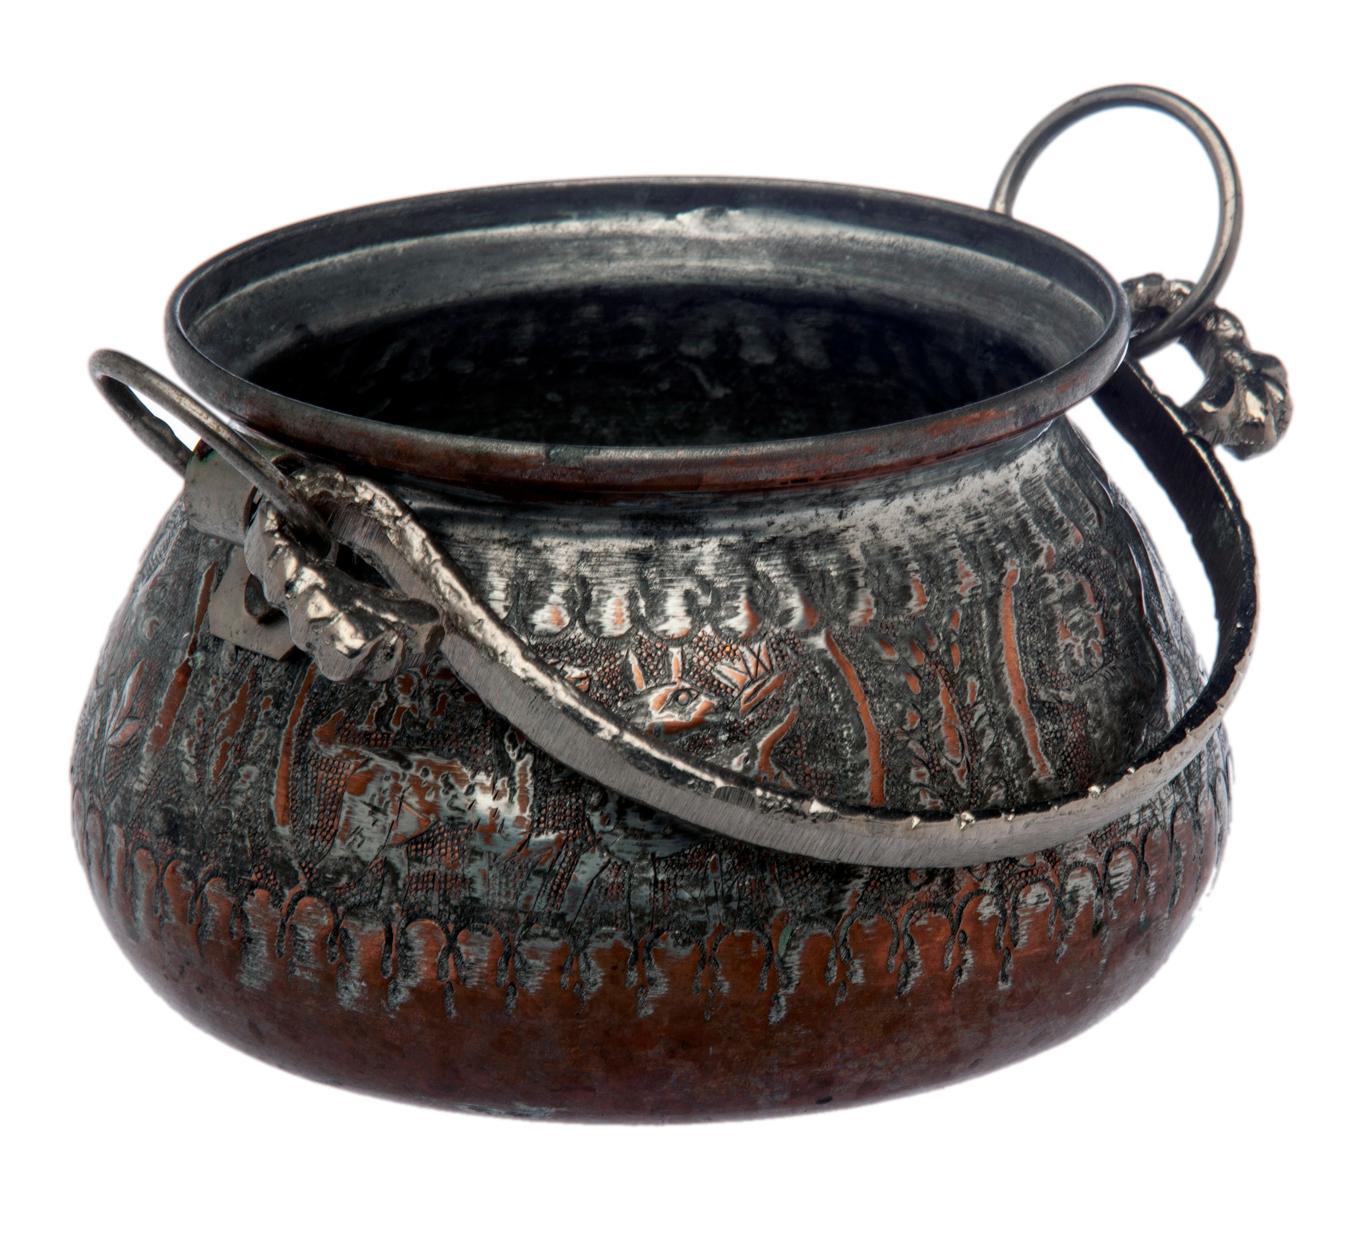 Persian tinned copped caldron with hand made handle. Heavily hand tooled with intricate etched pattern.